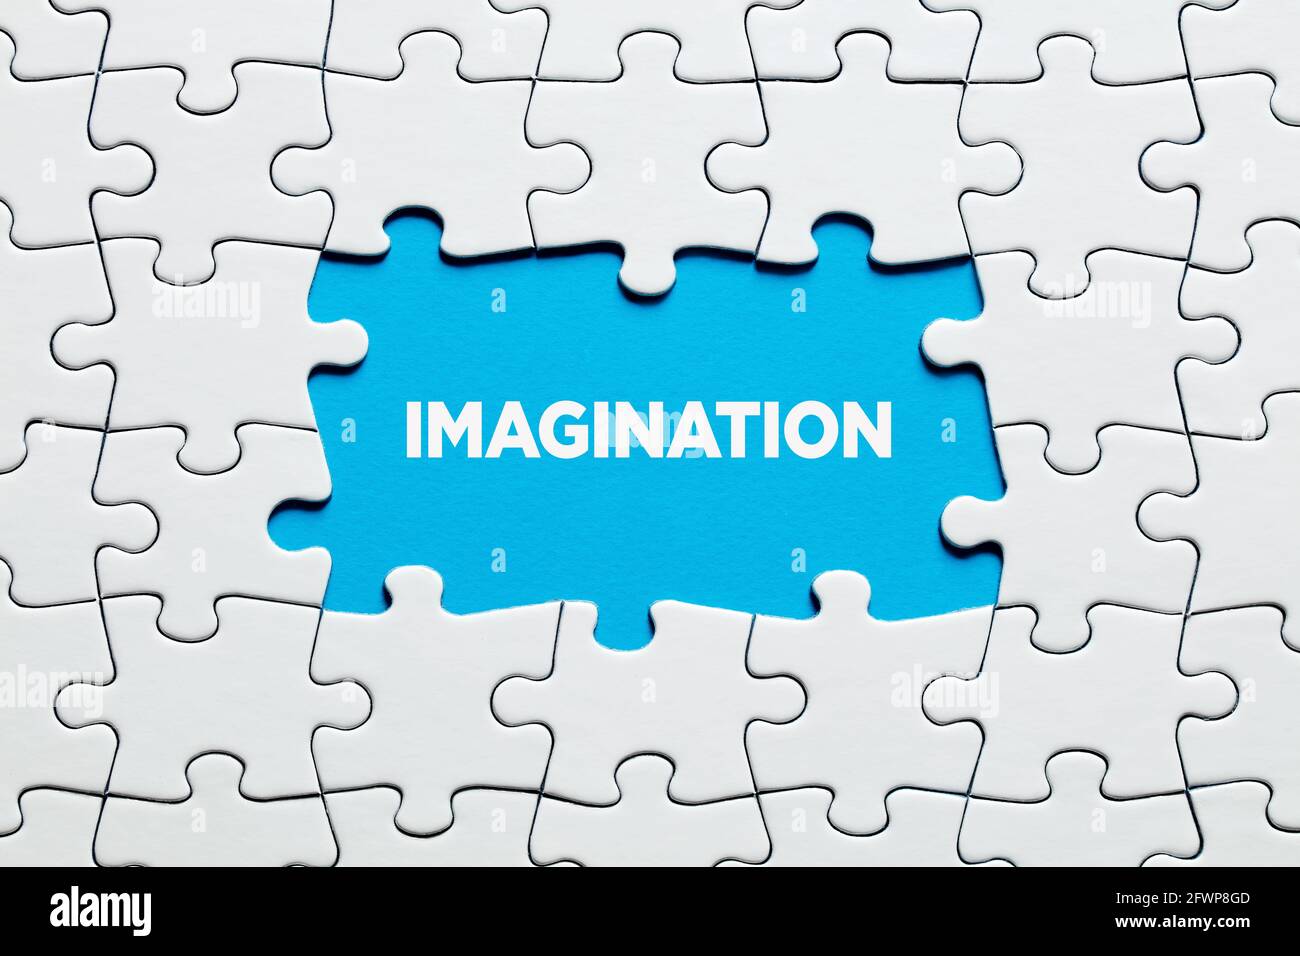 The word imagination on blue background surrounded by jigsaw puzzle. To increase or improve creativity and imagination in education or business. Stock Photo